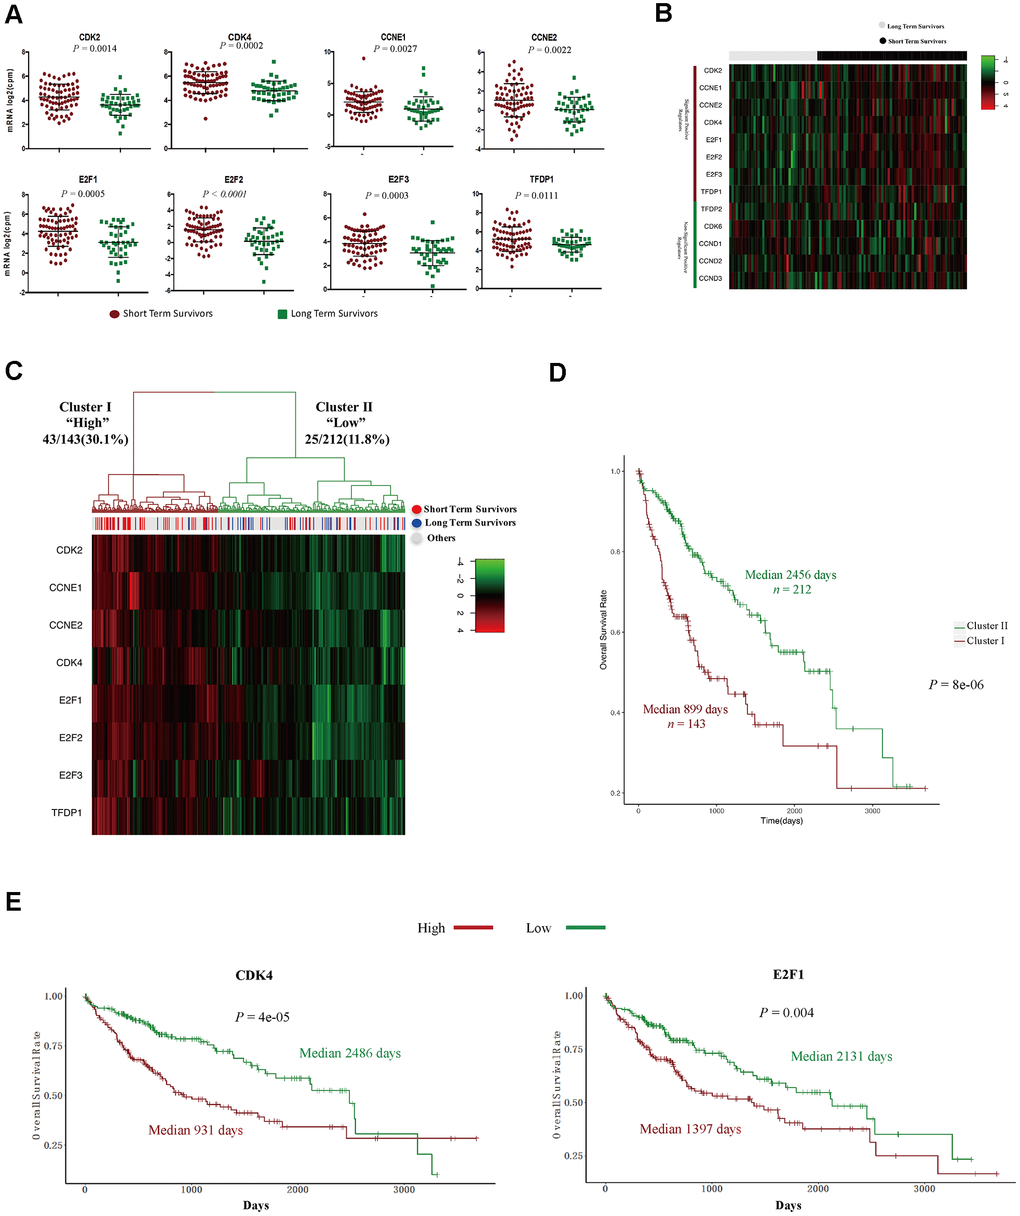 The expression signature of eight positive regulators of the G1/S cell cycle transition was an independent prognostic factor in HCC. (A) Tumor sample transcriptomic profiling of eight positive regulators of the G1/S cell cycle transition that differed significantly between STSs and LTSs of HCC. The data are shown as the mean ± standard deviation, and were compared using an unpaired two-tailed Student’s t-test. cpm, counts per million. (B) Tumor sample expression signature heatmap of thirteen positive regulators of the G1/S cell cycle transition in STSs and LTSs of HCC. Rows indicate the genes and columns indicate the patients. The patient survival status for each tumor is depicted directly above each column. (C) Unsupervised hierarchical clustering with Euclidean distances and Ward linkages of the expression matrix of eight positive regulators of the G1/S cell cycle transition in 355 HCC samples. Rows indicate the genes and columns indicate the patients. The patient survival status for each tumor is depicted directly above each column. (D) Kaplan-Meier curves for the clusters resulting from the unsupervised hierarchical clustering in (C). (E) Kaplan-Meier curve and log-rank test for HCC patients based on the expression of CDK2 and E2F1.